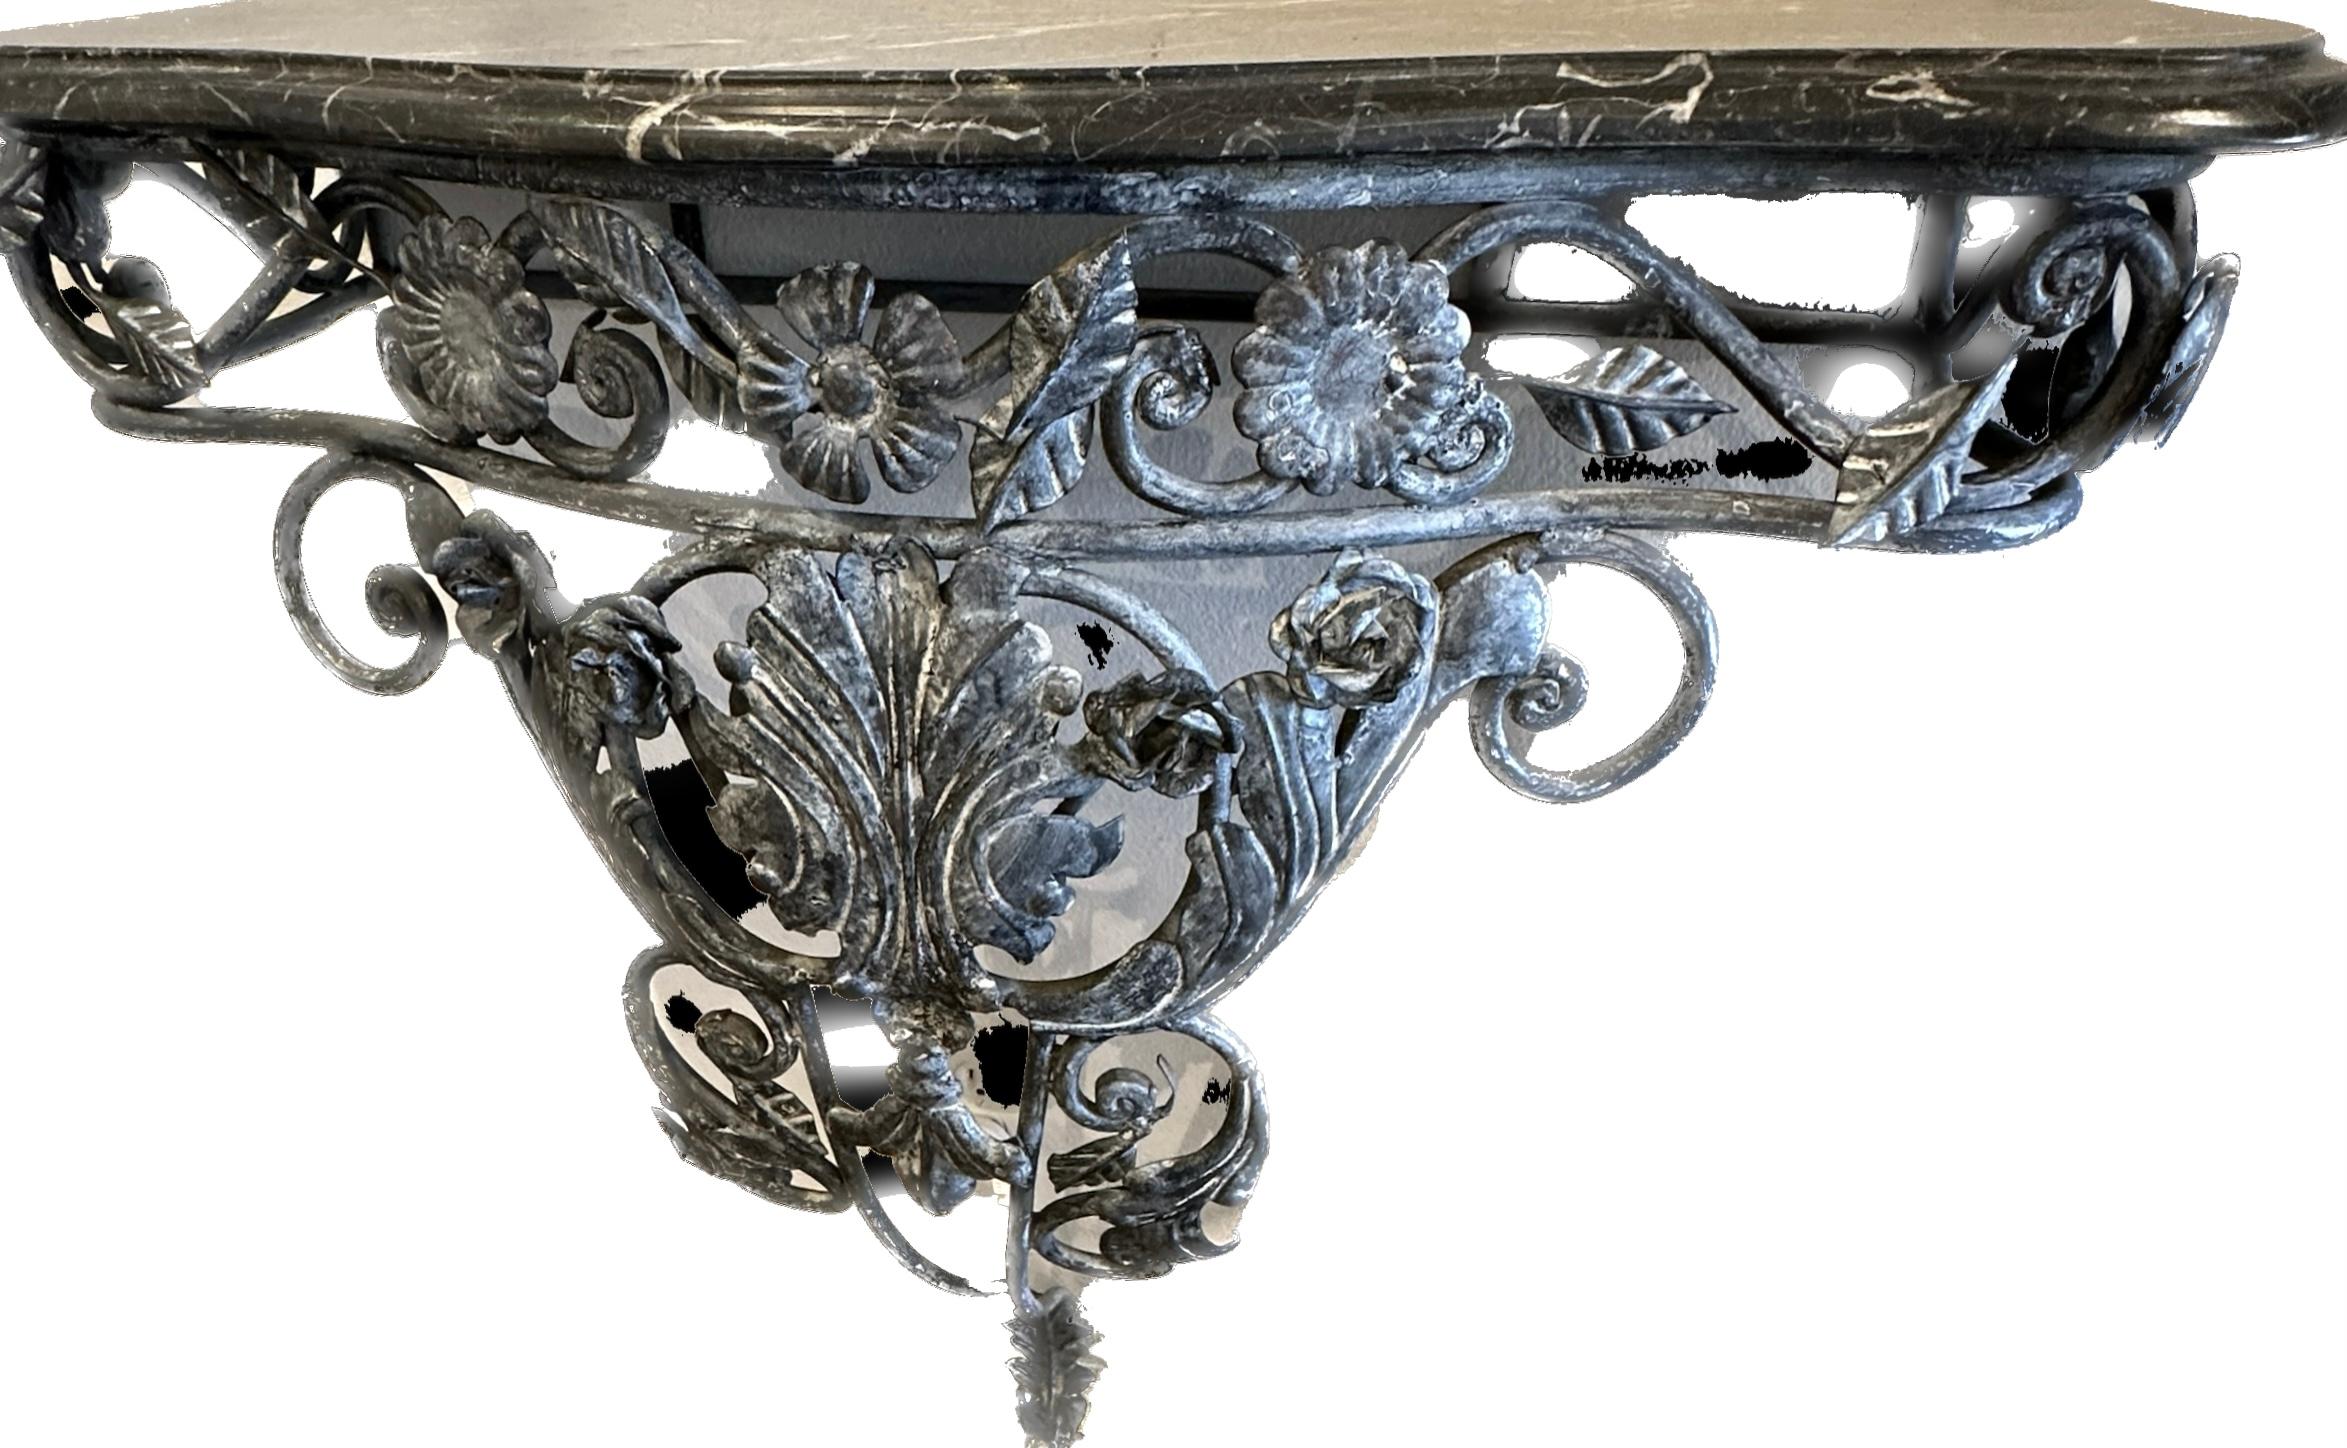 Bow front, Wall console table in floral wrought iron base.  Top is black and white Italian marble with bevel edge.  